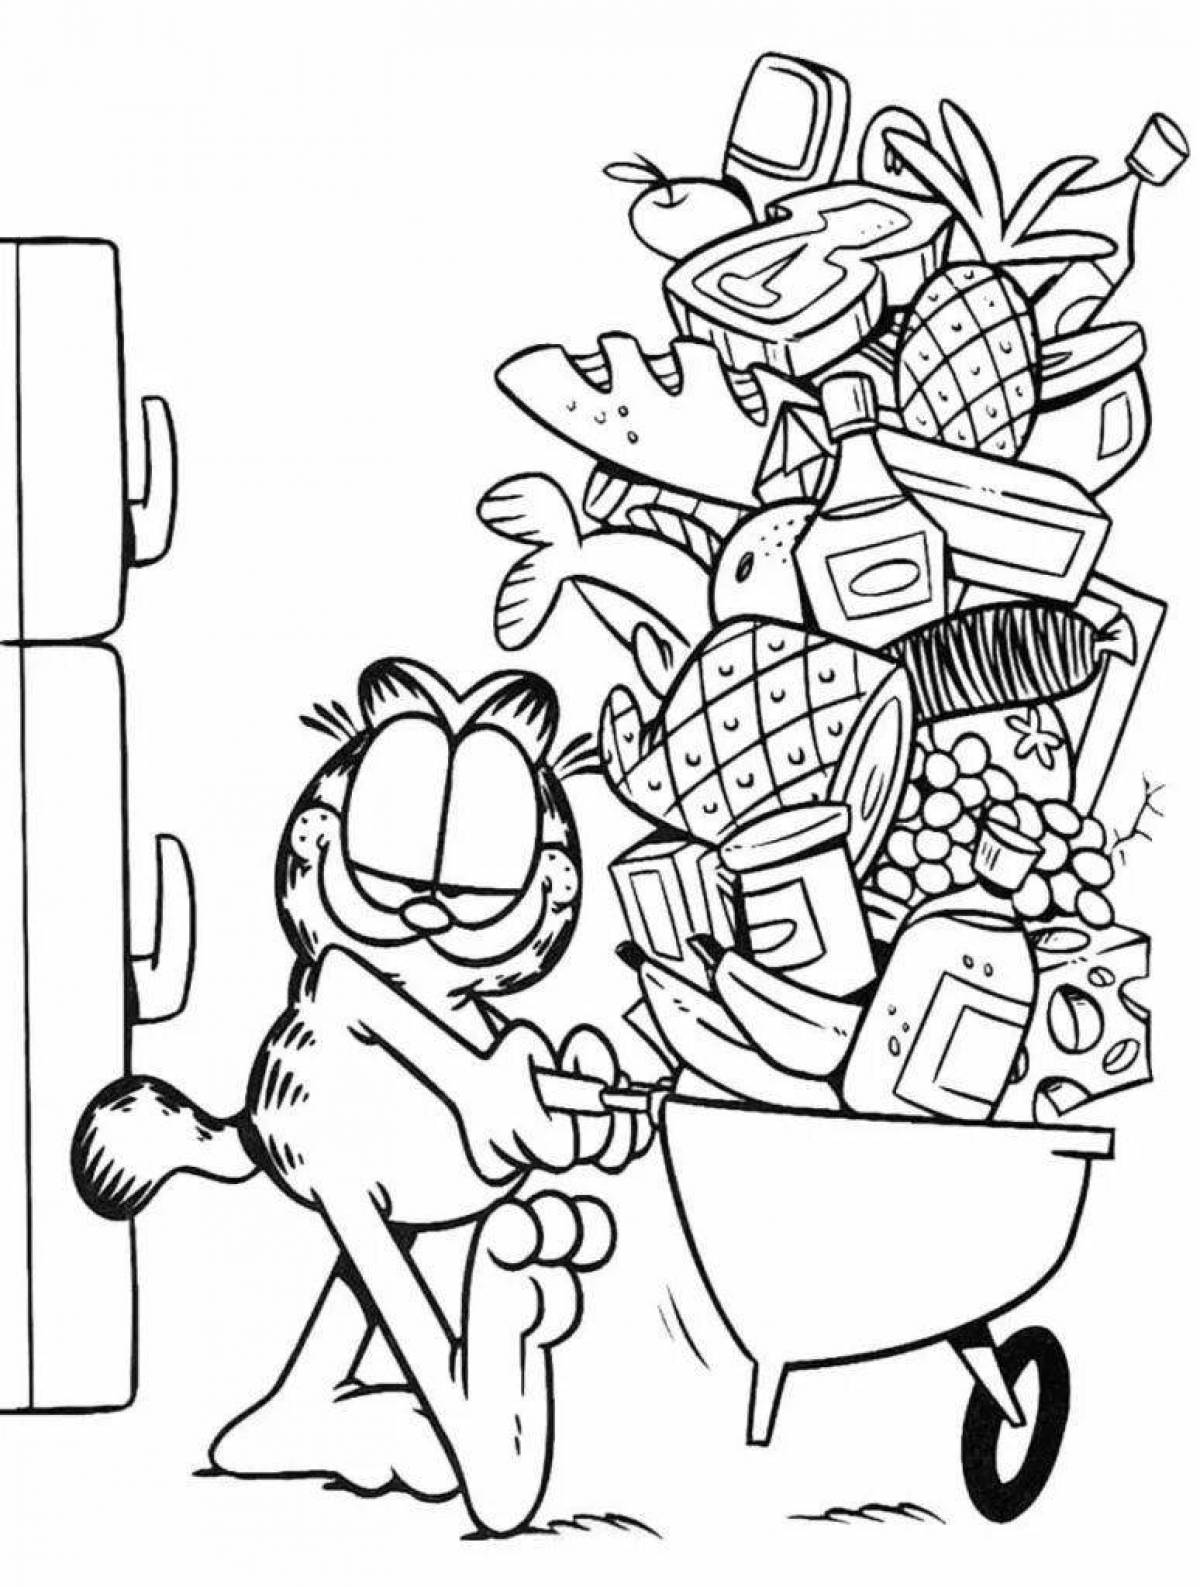 Colorful joke coloring pages